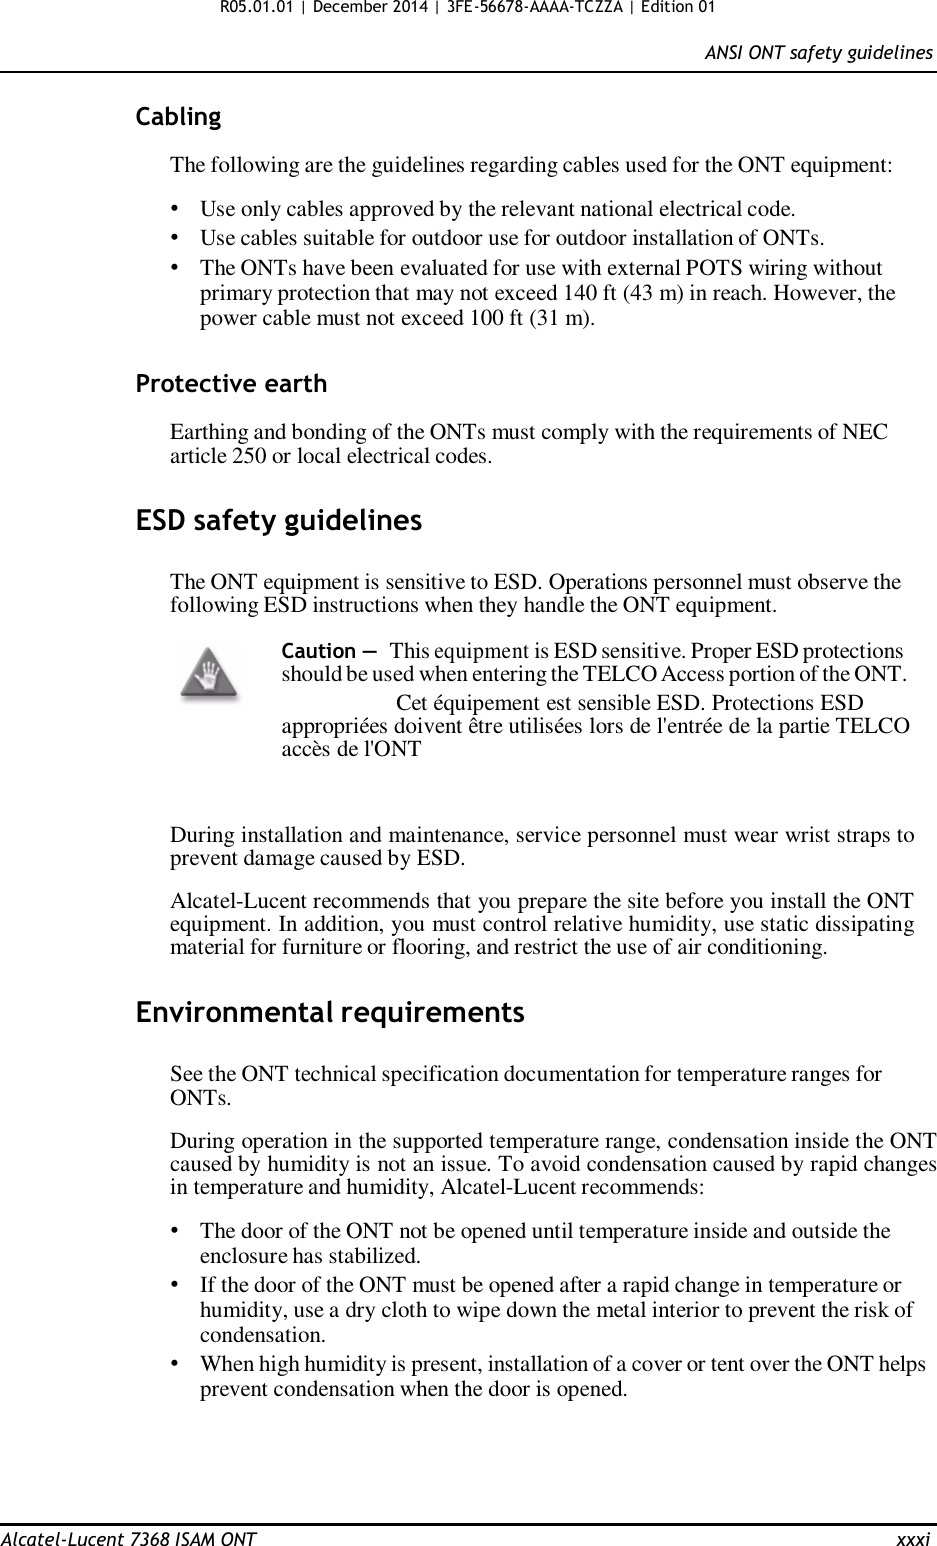 R05.01.01 | December 2014 | 3FE-56678-AAAA-TCZZA | Edition 01  ANSI ONT safety guidelines   Cabling  The following are the guidelines regarding cables used for the ONT equipment:  • Use only cables approved by the relevant national electrical code. • Use cables suitable for outdoor use for outdoor installation of ONTs. • The ONTs have been evaluated for use with external POTS wiring without primary protection that may not exceed 140 ft (43 m) in reach. However, the power cable must not exceed 100 ft (31 m).   Protective earth  Earthing and bonding of the ONTs must comply with the requirements of NEC article 250 or local electrical codes.   ESD safety guidelines   The ONT equipment is sensitive to ESD. Operations personnel must observe the following ESD instructions when they handle the ONT equipment.  Caution — This equipment is ESD sensitive. Proper ESD protections should be used when entering the TELCO Access portion of the ONT. Cet équipement est sensible ESD. Protections ESD appropriées doivent être utilisées lors de l&apos;entrée de la partie TELCO accès de l&apos;ONT    During installation and maintenance, service personnel must wear wrist straps to prevent damage caused by ESD.  Alcatel-Lucent recommends that you prepare the site before you install the ONT equipment. In addition, you must control relative humidity, use static dissipating material for furniture or flooring, and restrict the use of air conditioning.   Environmental requirements  See the ONT technical specification documentation for temperature ranges for ONTs.  During operation in the supported temperature range, condensation inside the ONT caused by humidity is not an issue. To avoid condensation caused by rapid changes in temperature and humidity, Alcatel-Lucent recommends:  • The door of the ONT not be opened until temperature inside and outside the enclosure has stabilized. • If the door of the ONT must be opened after a rapid change in temperature or humidity, use a dry cloth to wipe down the metal interior to prevent the risk of condensation. • When high humidity is present, installation of a cover or tent over the ONT helps prevent condensation when the door is opened.       Alcatel-Lucent 7368 ISAM ONT  xxxi 